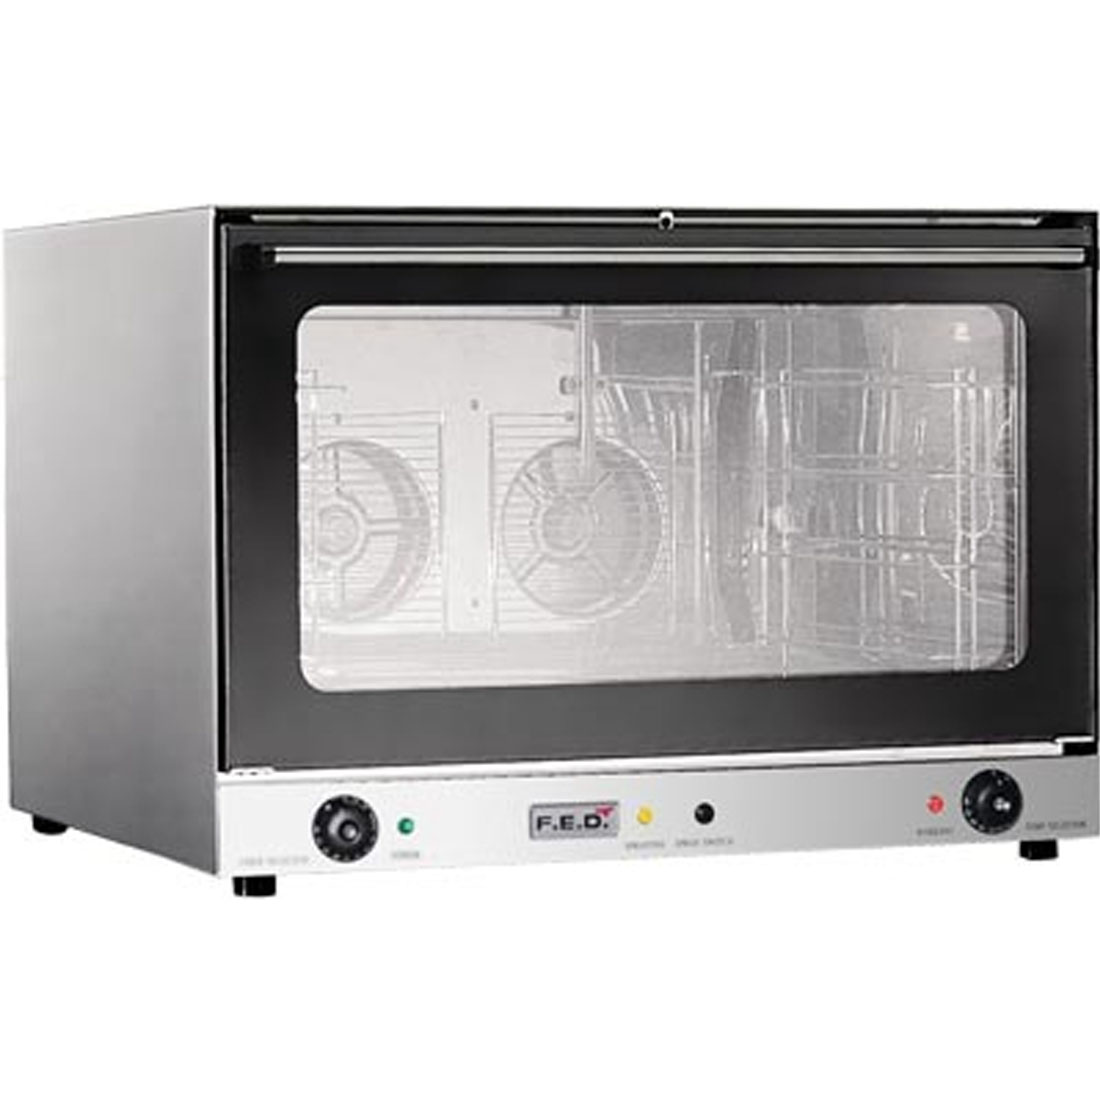 YXD-8A/15 CONVECTMAX OVEN 50 to 300Â°C